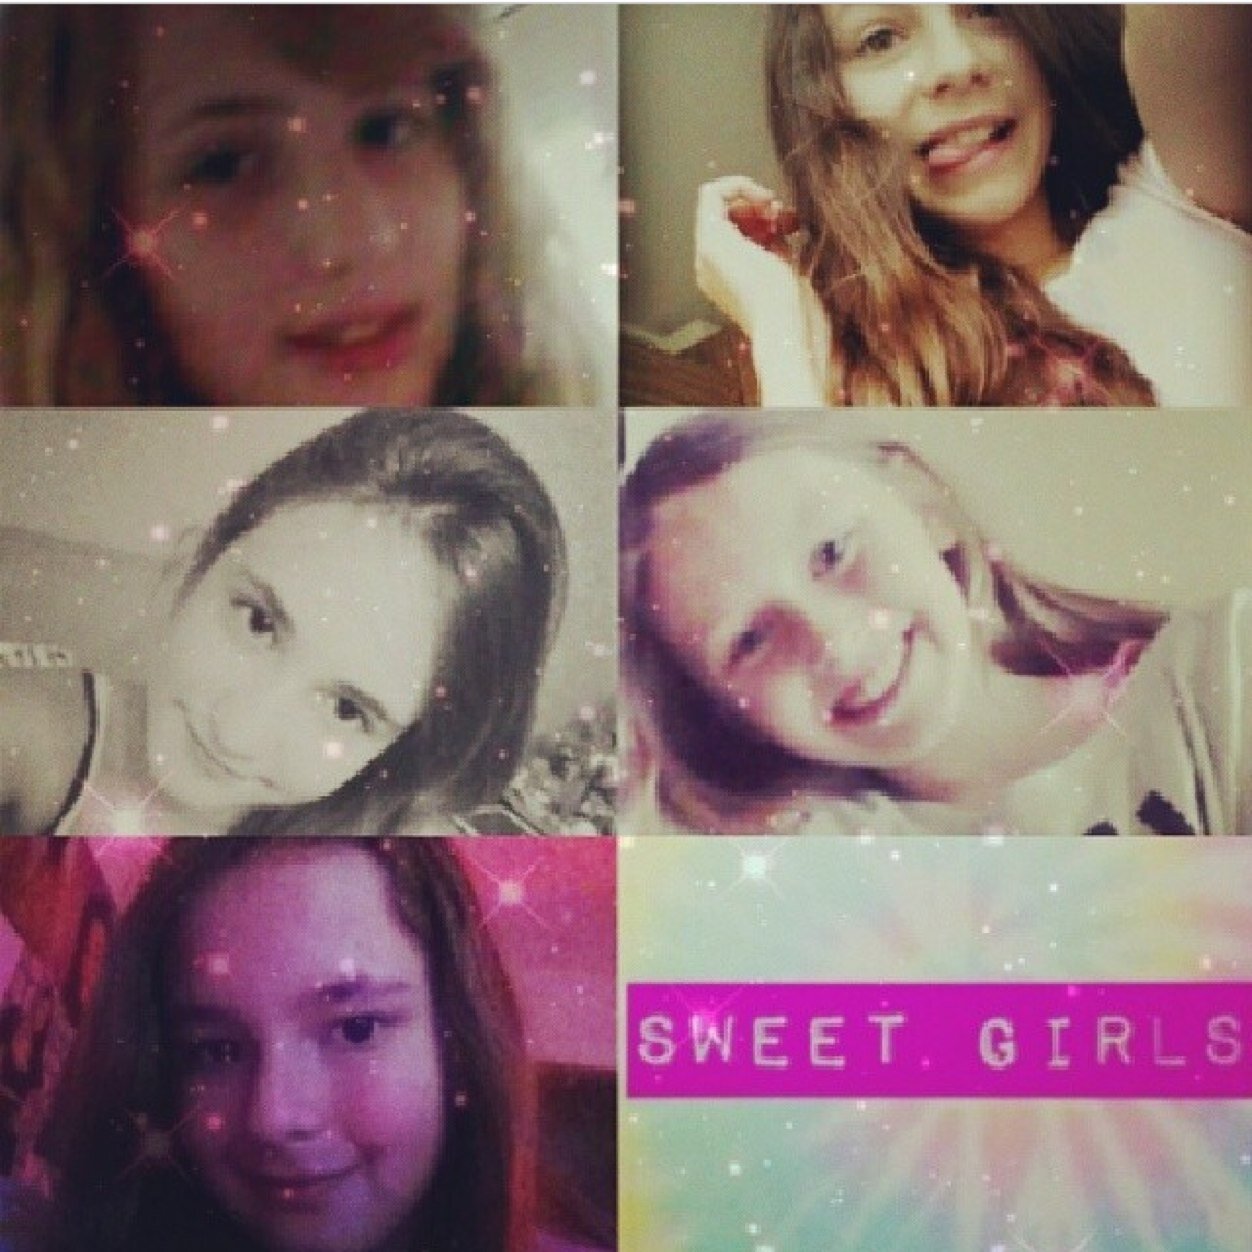 4 best friends-one dream . Ellie, Jane, Maro, Sabi and we're the sweet girls we post Covers on Youtube and Instagram